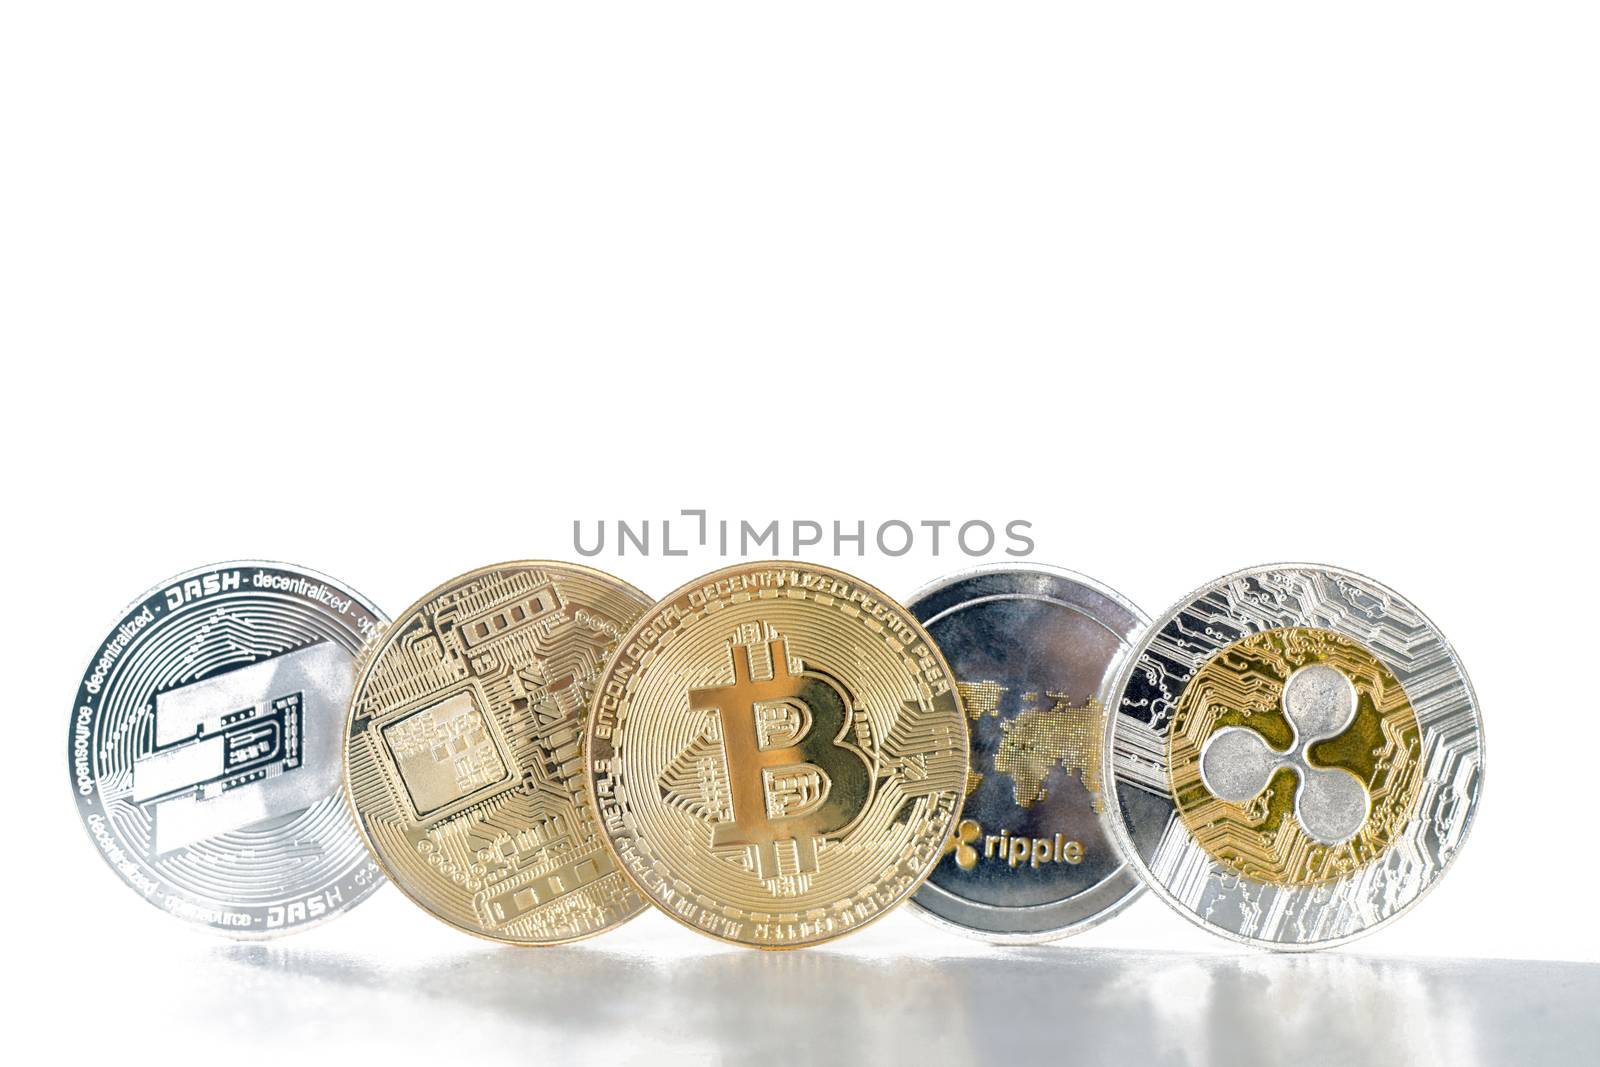 Shiny crypto currency coins on a white background.